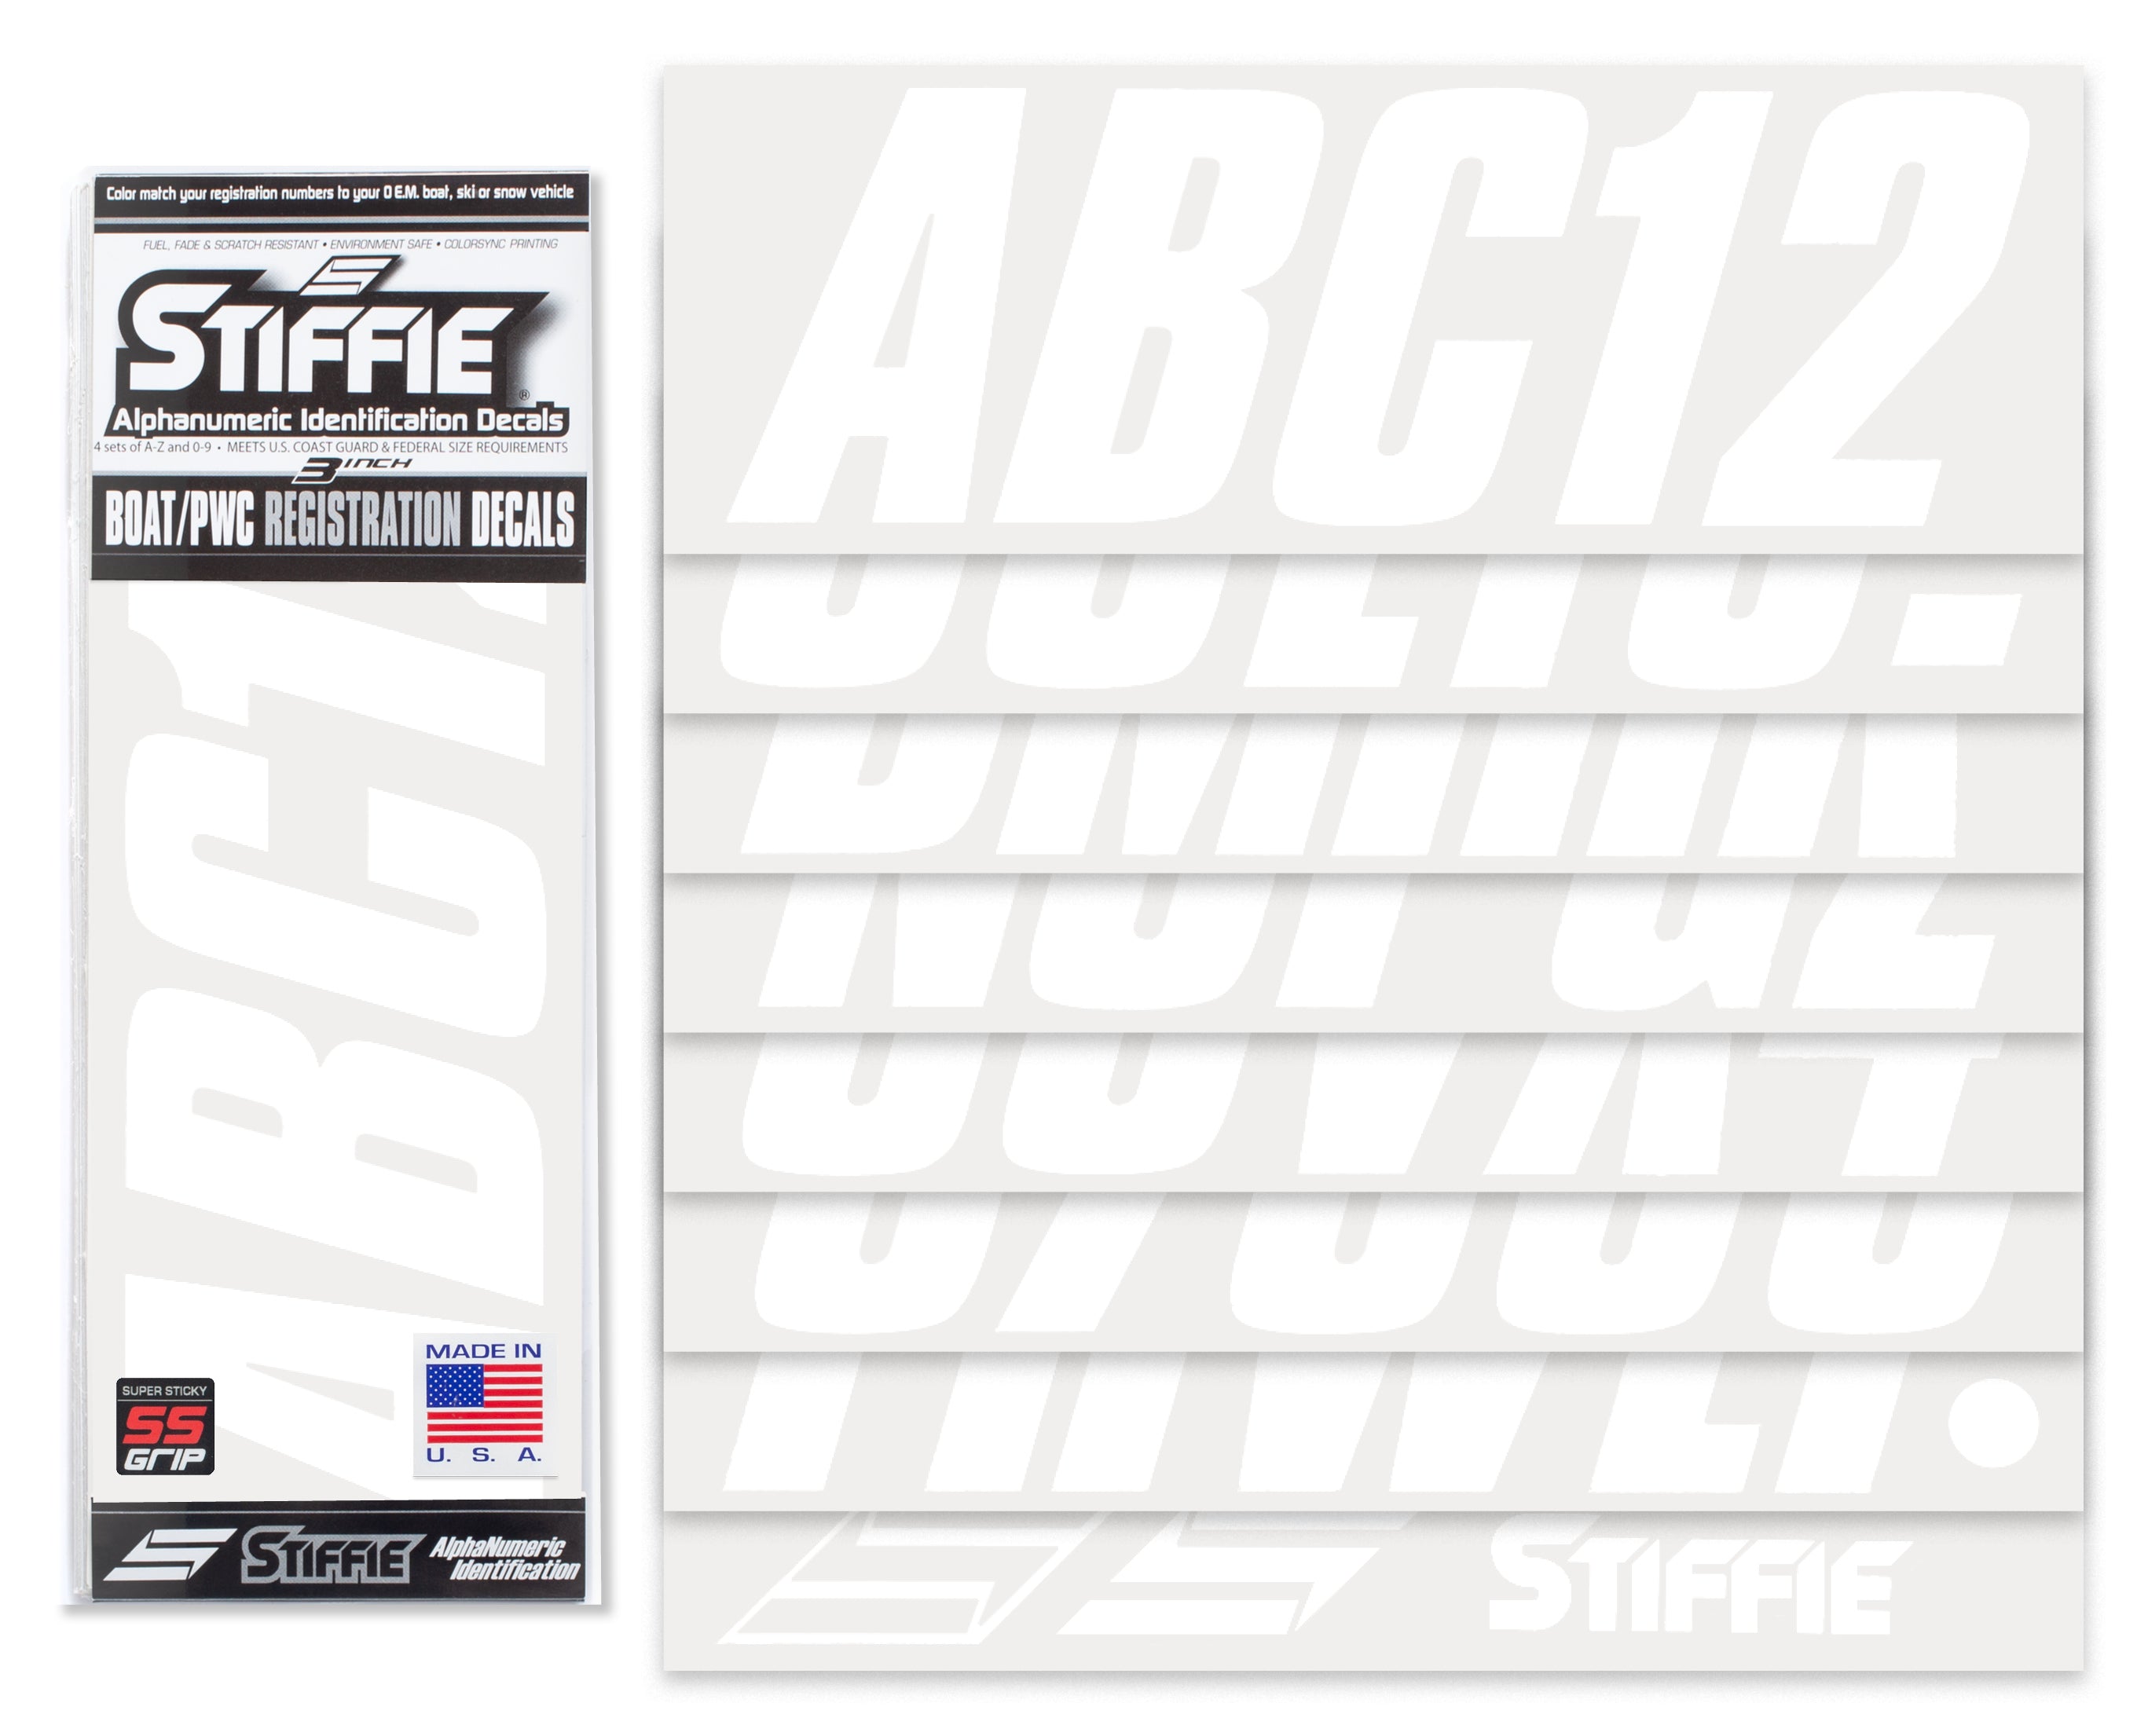 STIFFIE Shift White Super Sticky 3" Alpha Numeric Registration Identification Numbers Stickers Decals for Sea-Doo Spark, Inflatable Boats, Ribs, Hypalon/PVC, PWC and Boats.